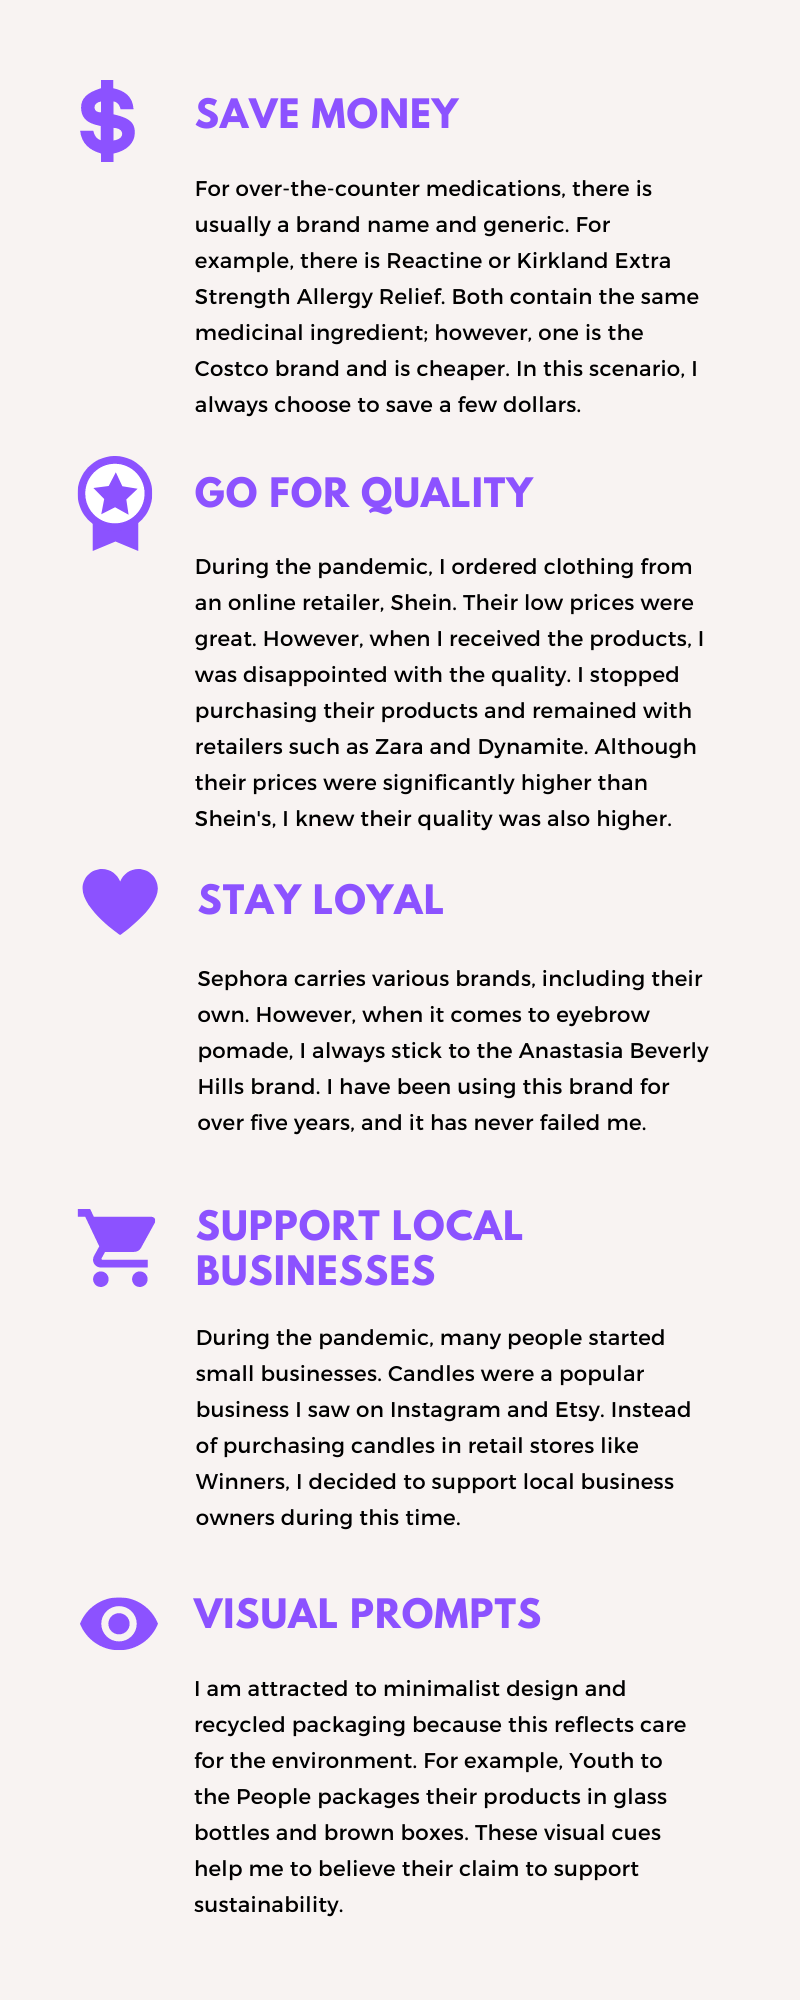 Infogrpahic depicting the variables that influence shoppers such as saving money; getting quality puchases; staying loyal to certain brands; and supporting local businesses.